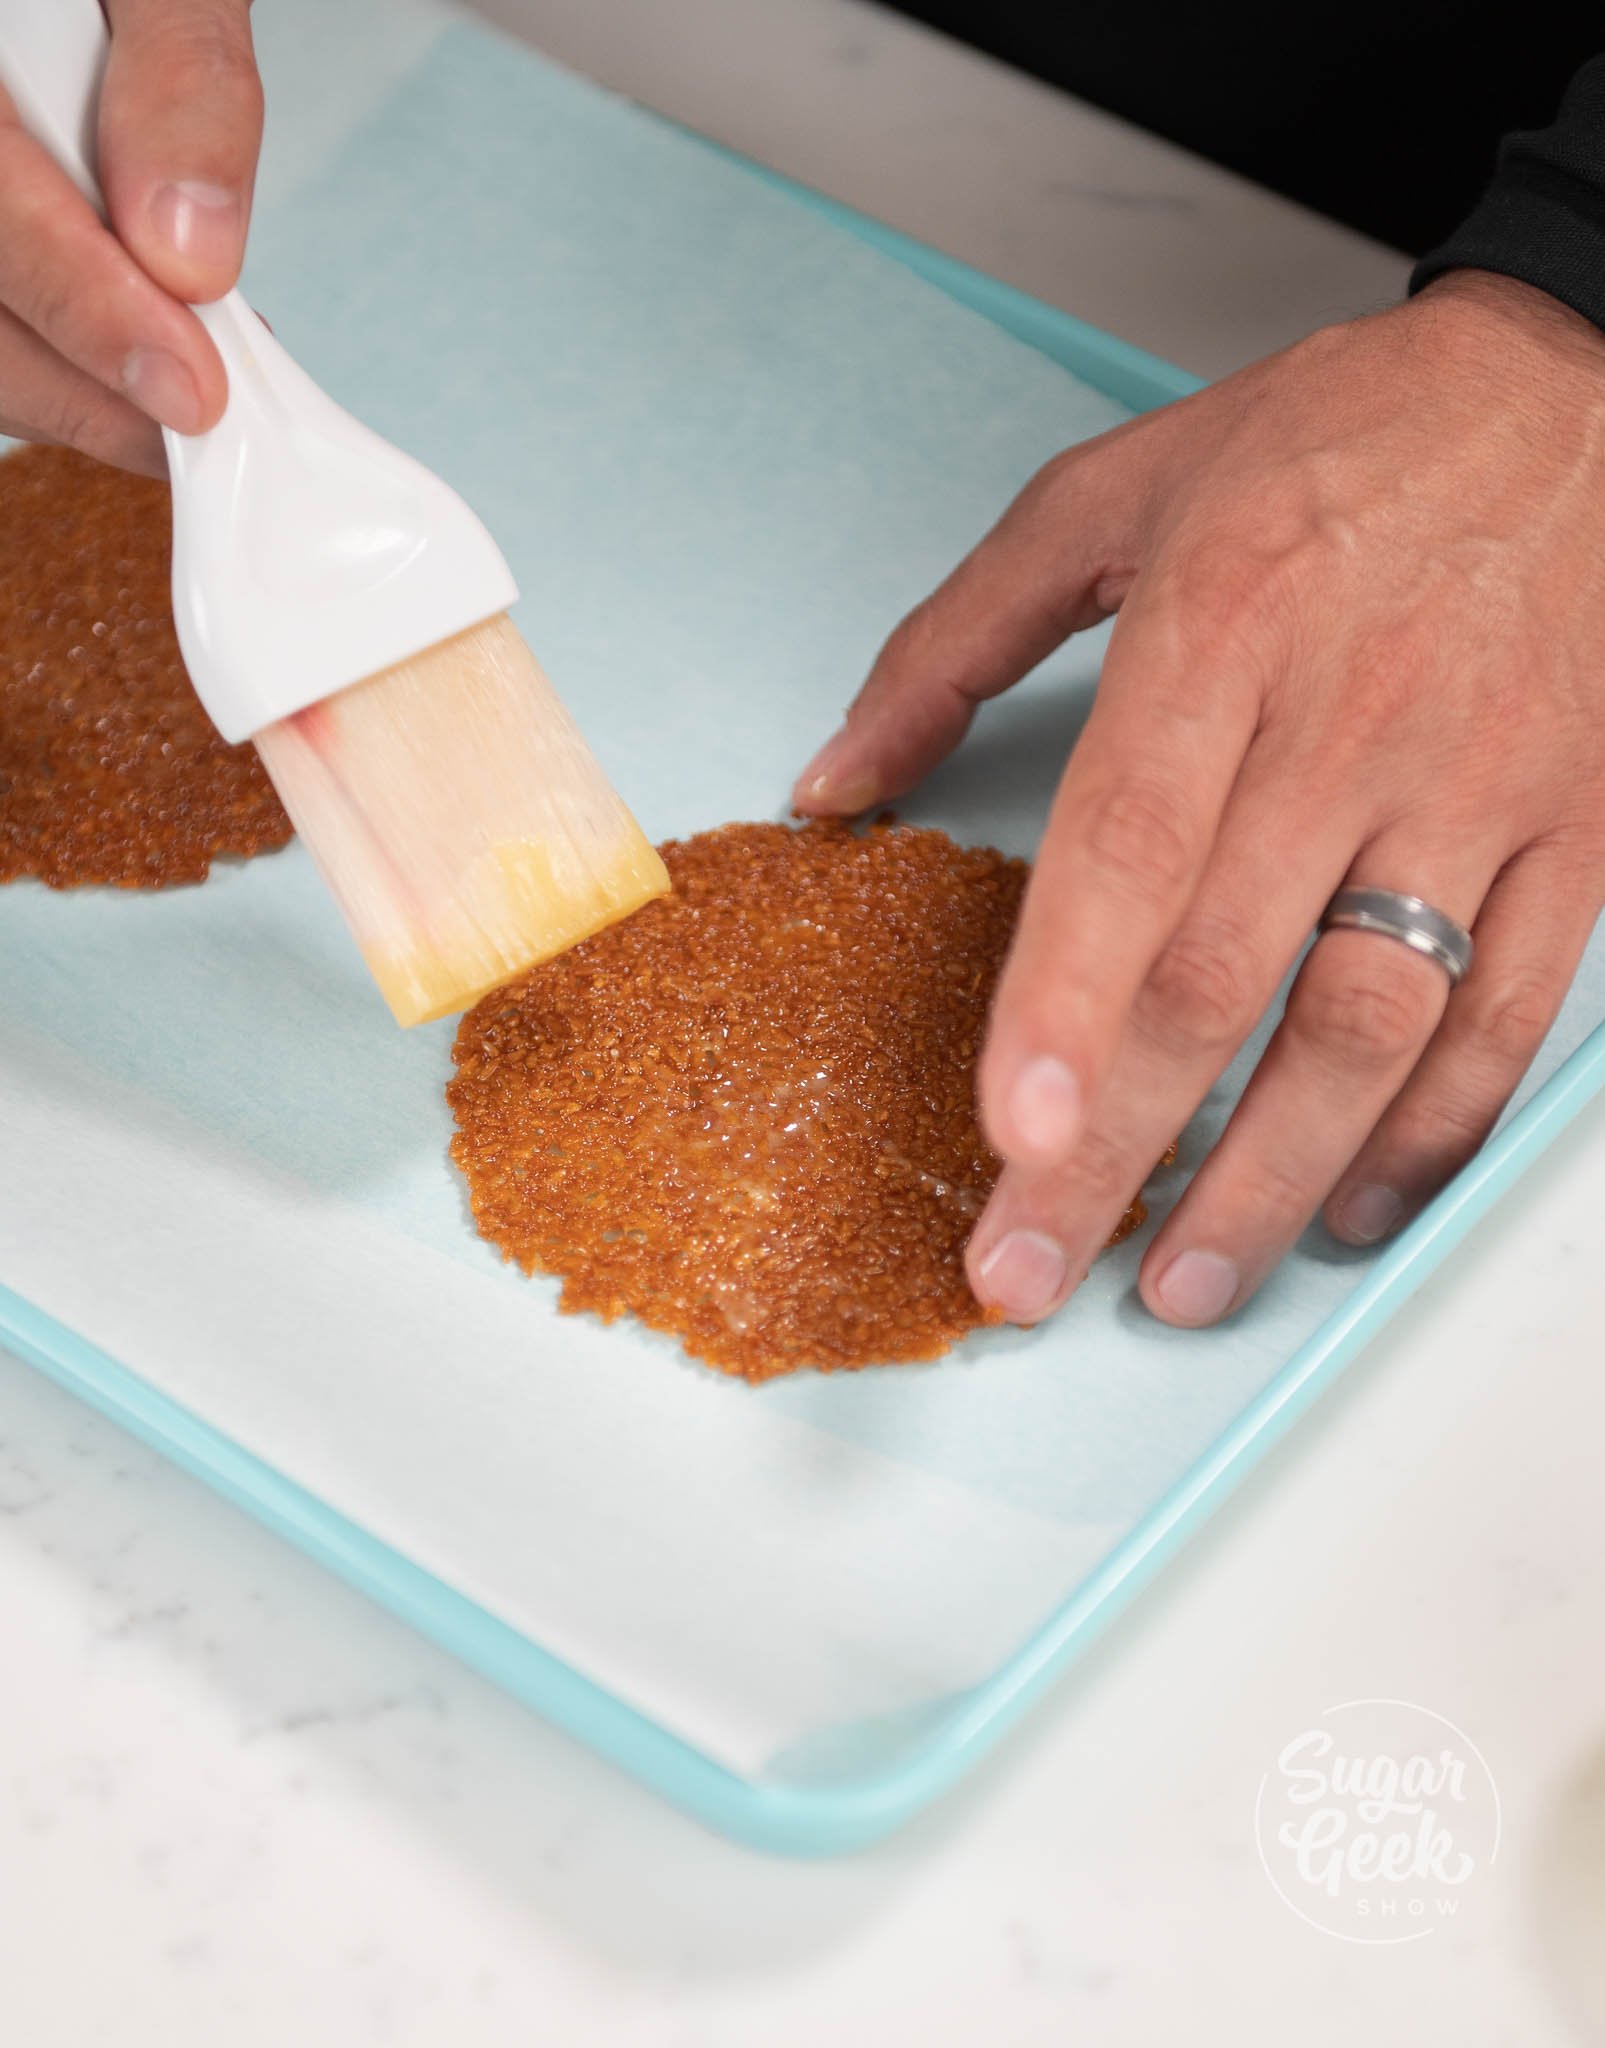 hand using pastry brush to brush cocoa butter onto nougatine.